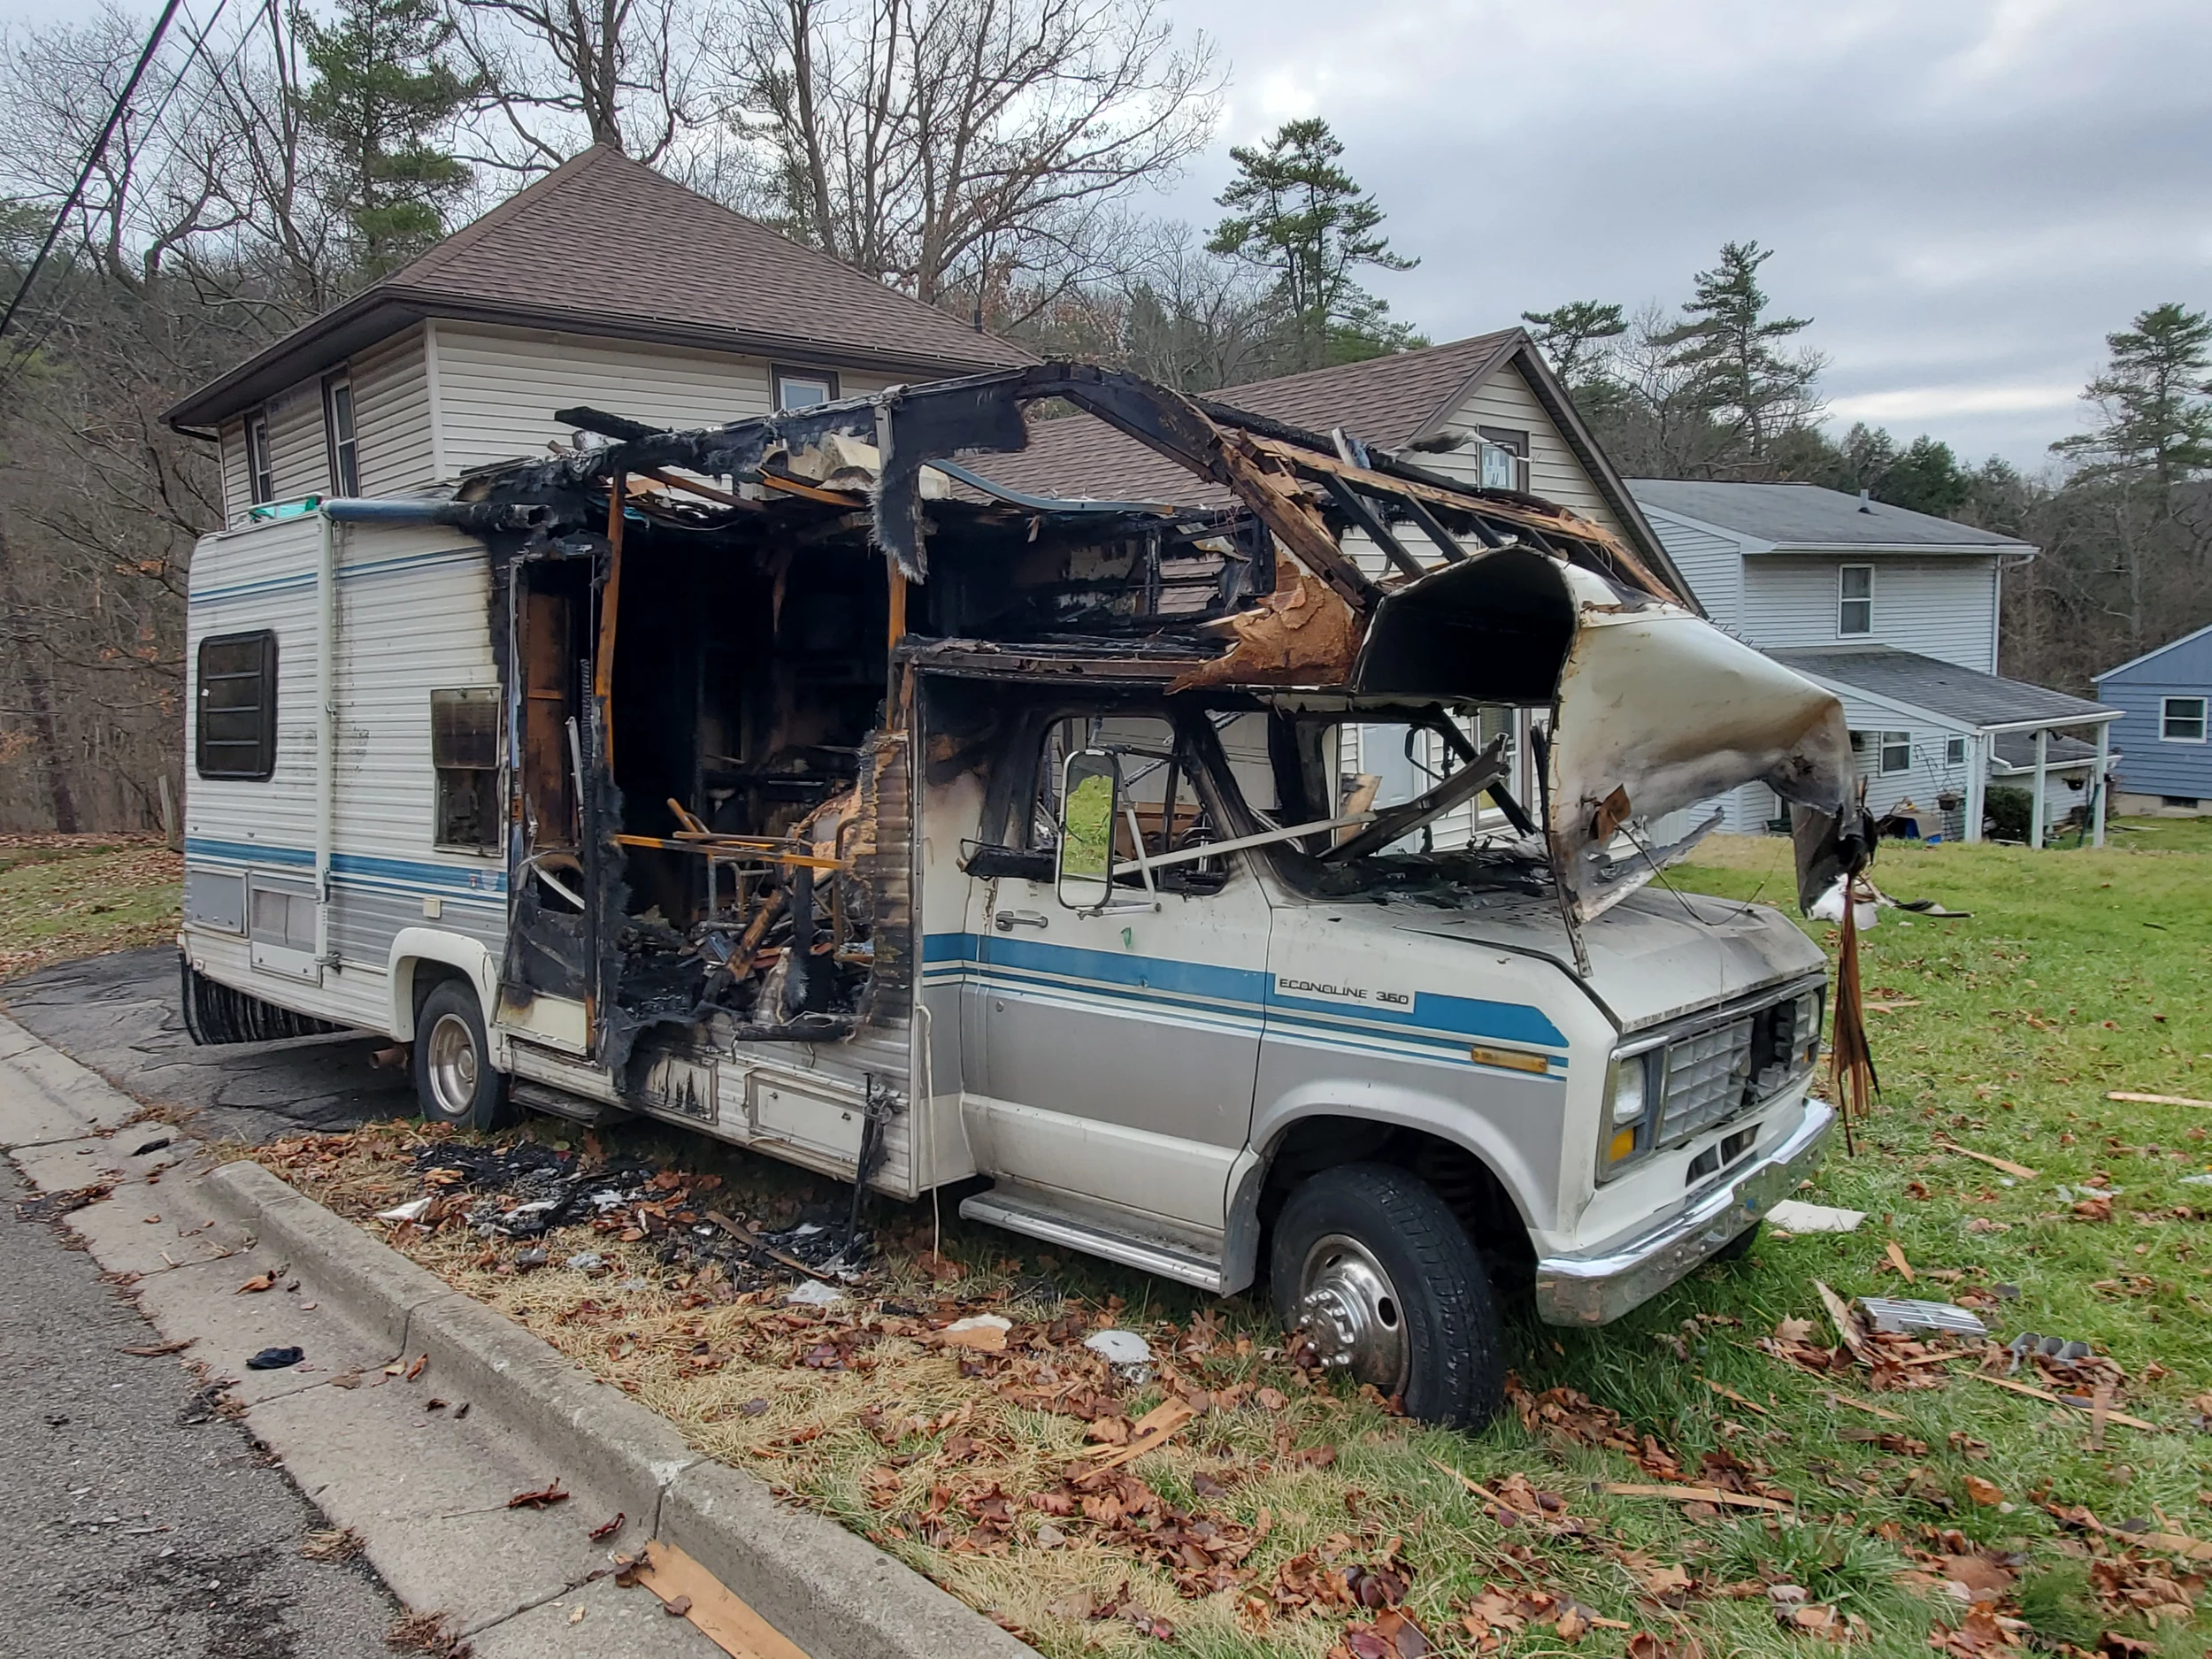 Residents Near Ross Park Want Burnt-Out RV Eyesore Hauled Away picture